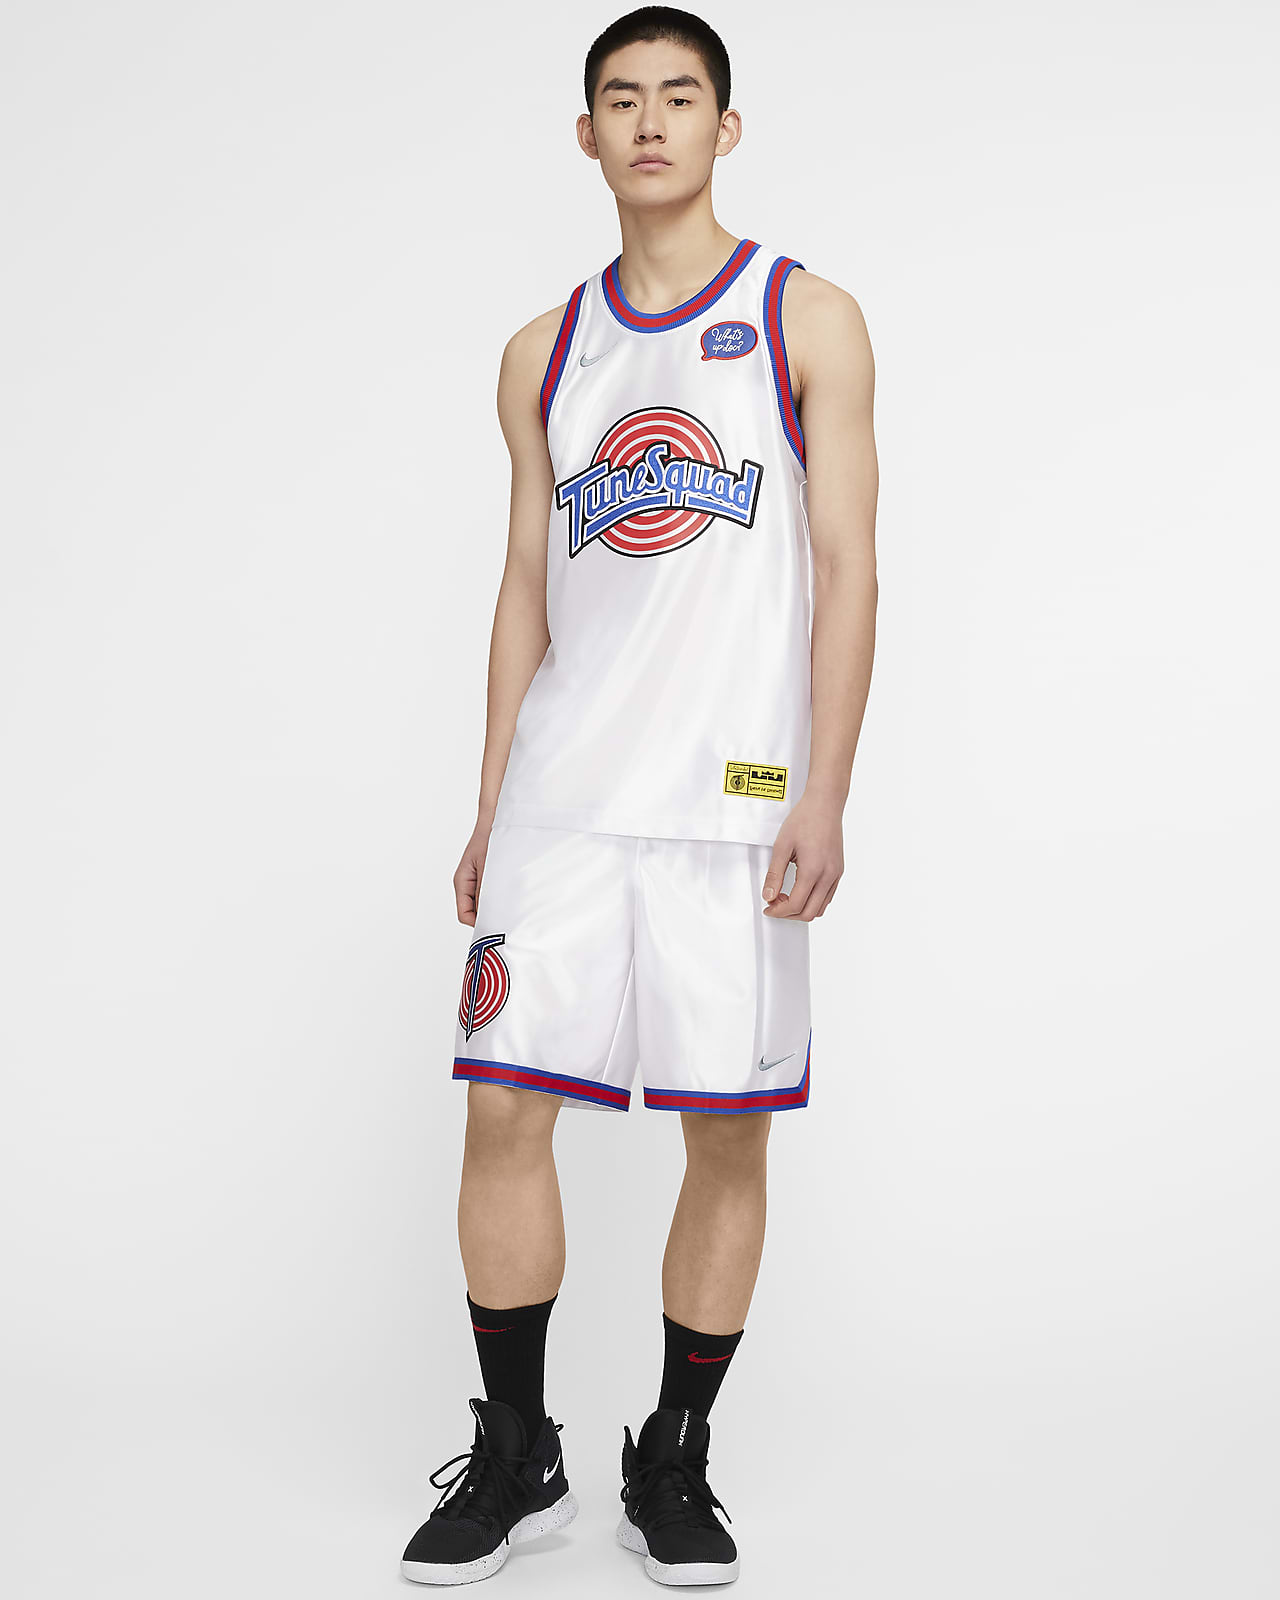 toon squad jersey nike